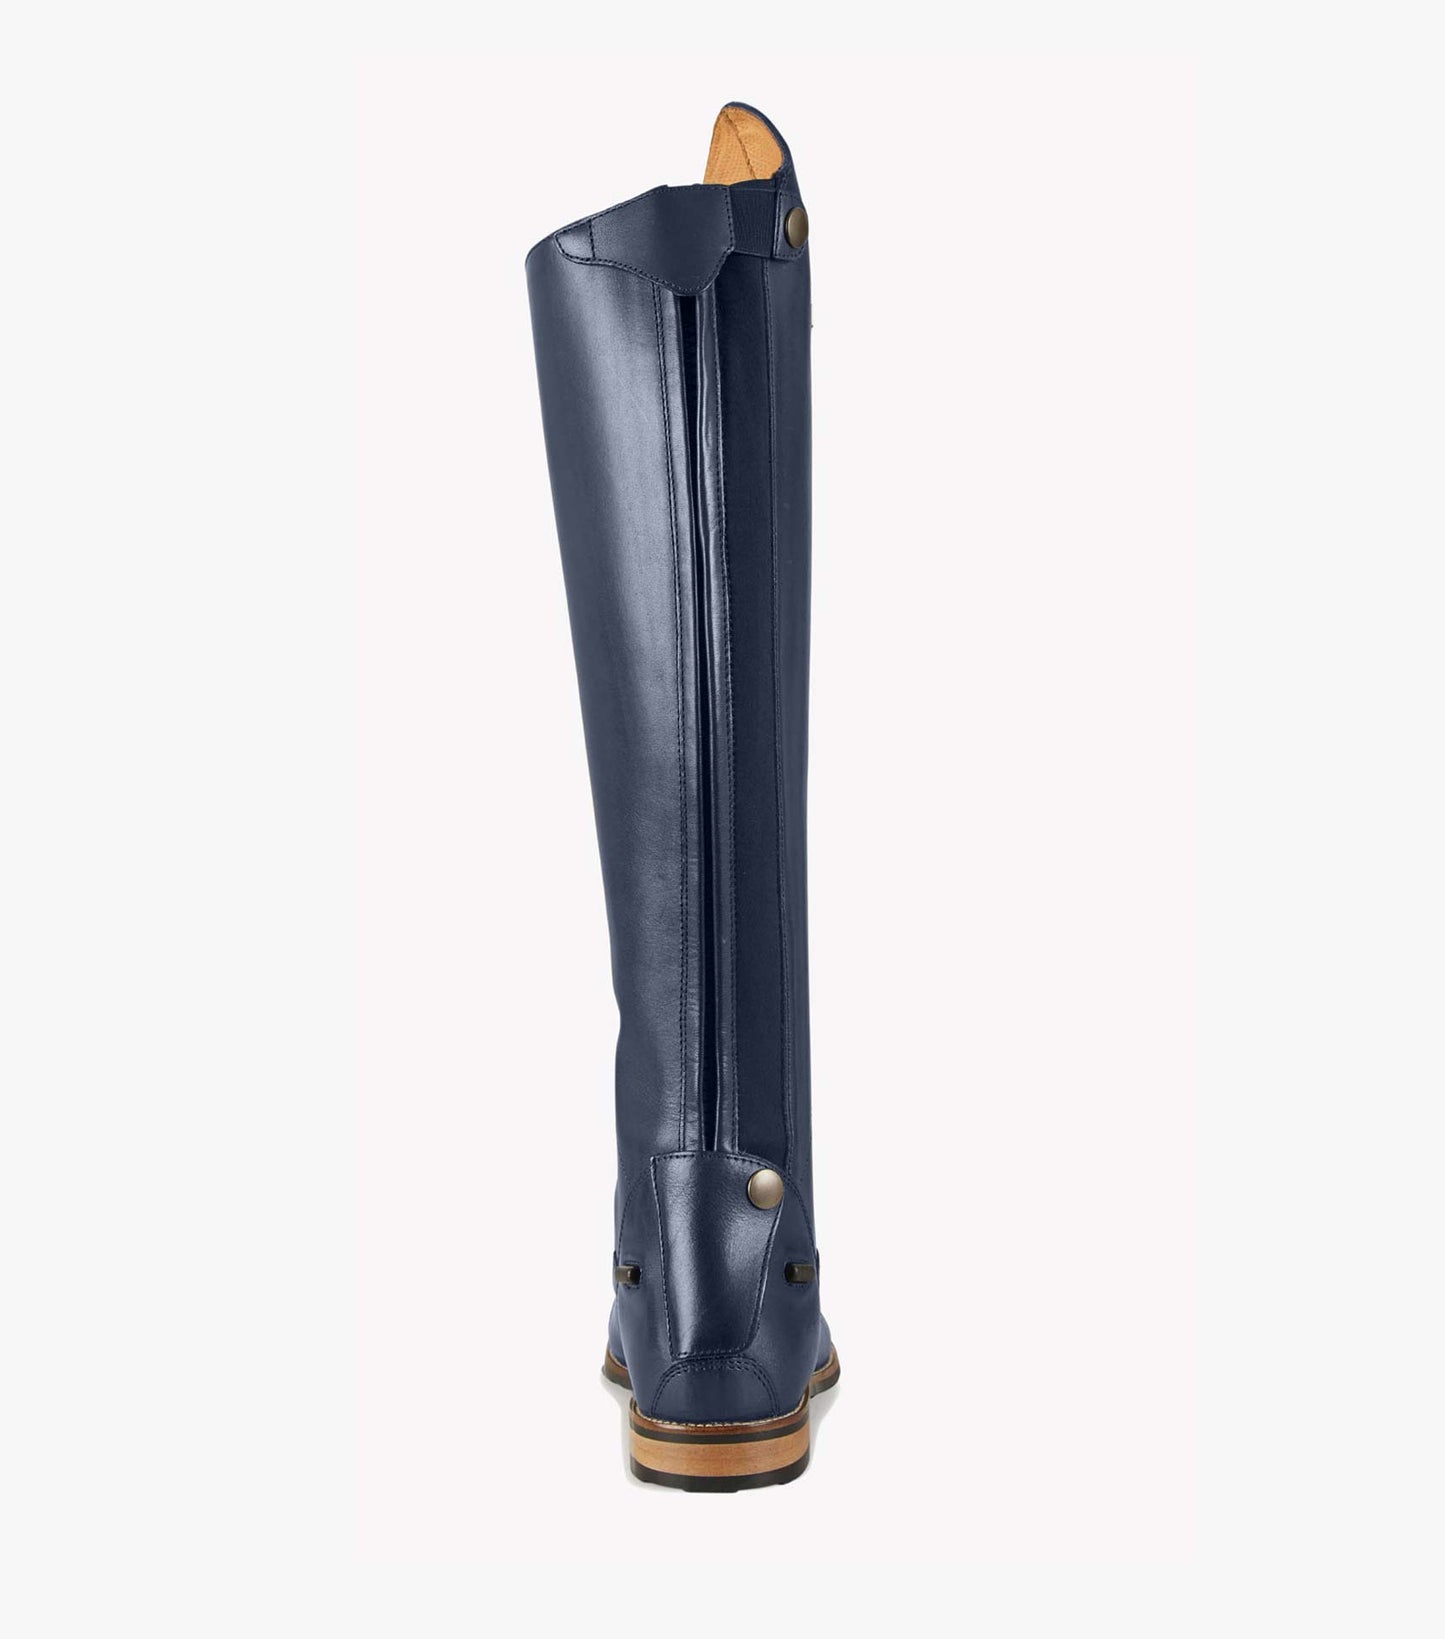 Premier Equine UK Maurizia Ladies Lace Front Tall Leather Riding Boot